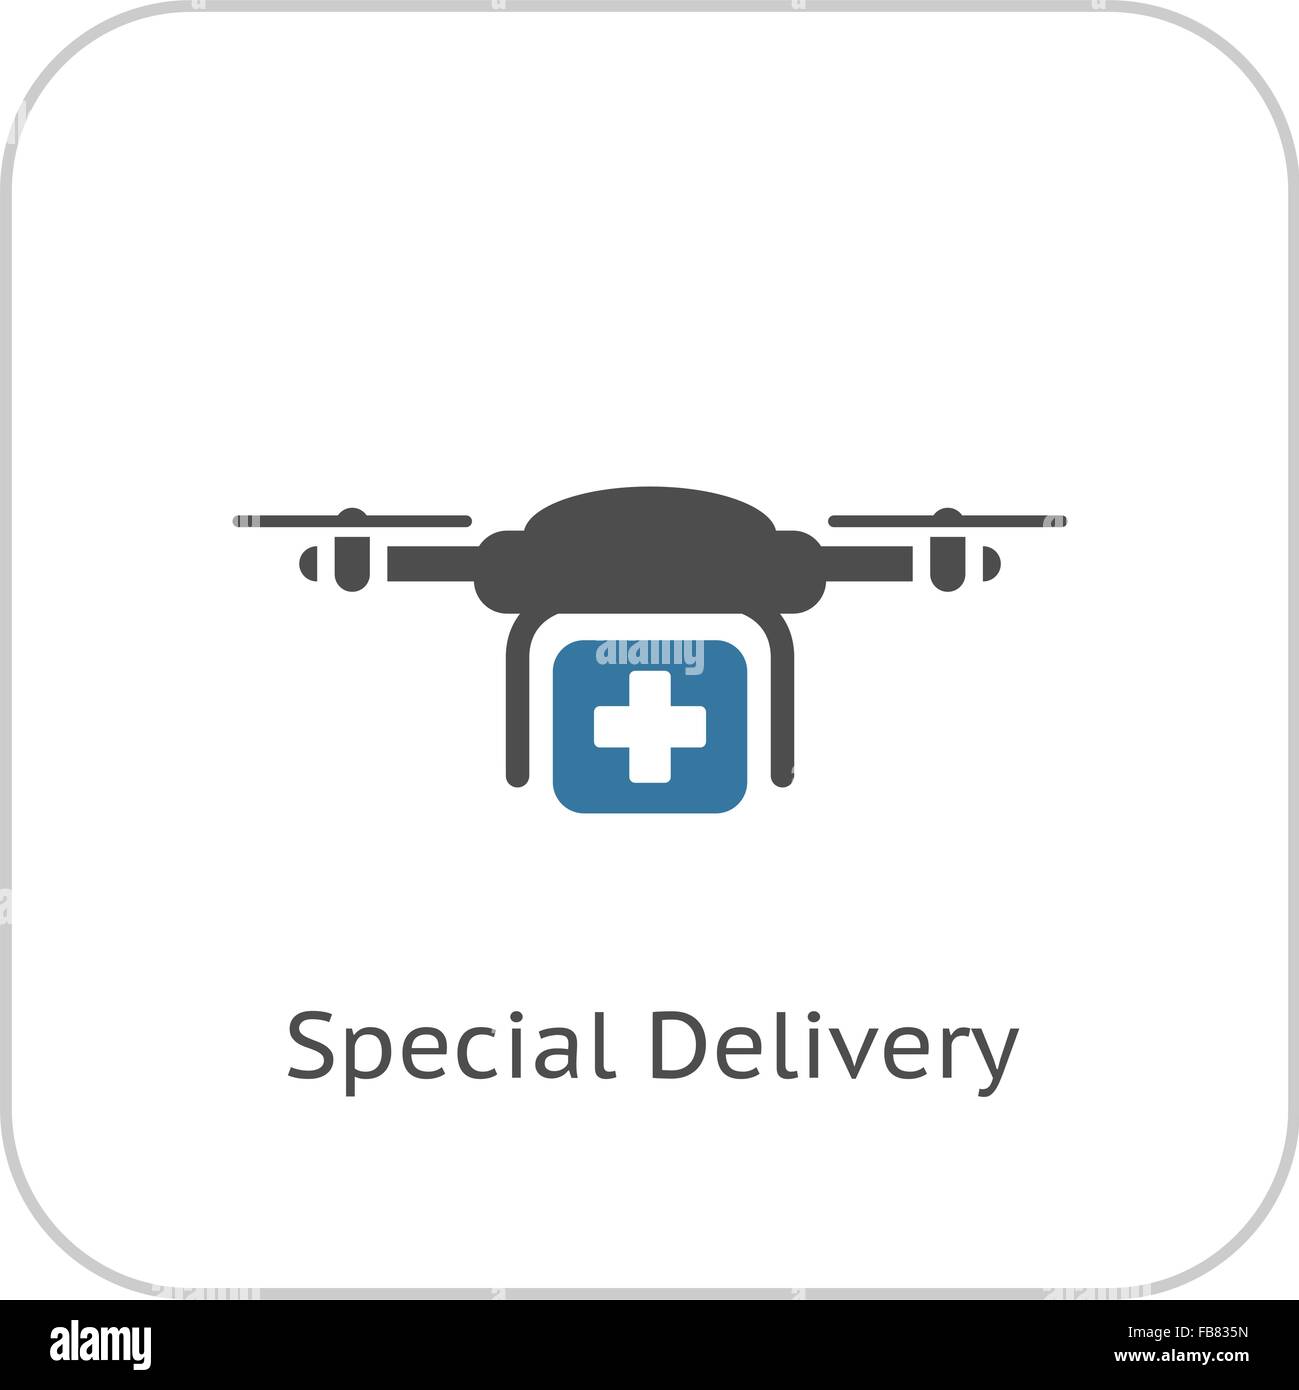 Special Delivery Icon. Flat Design. Stock Vector